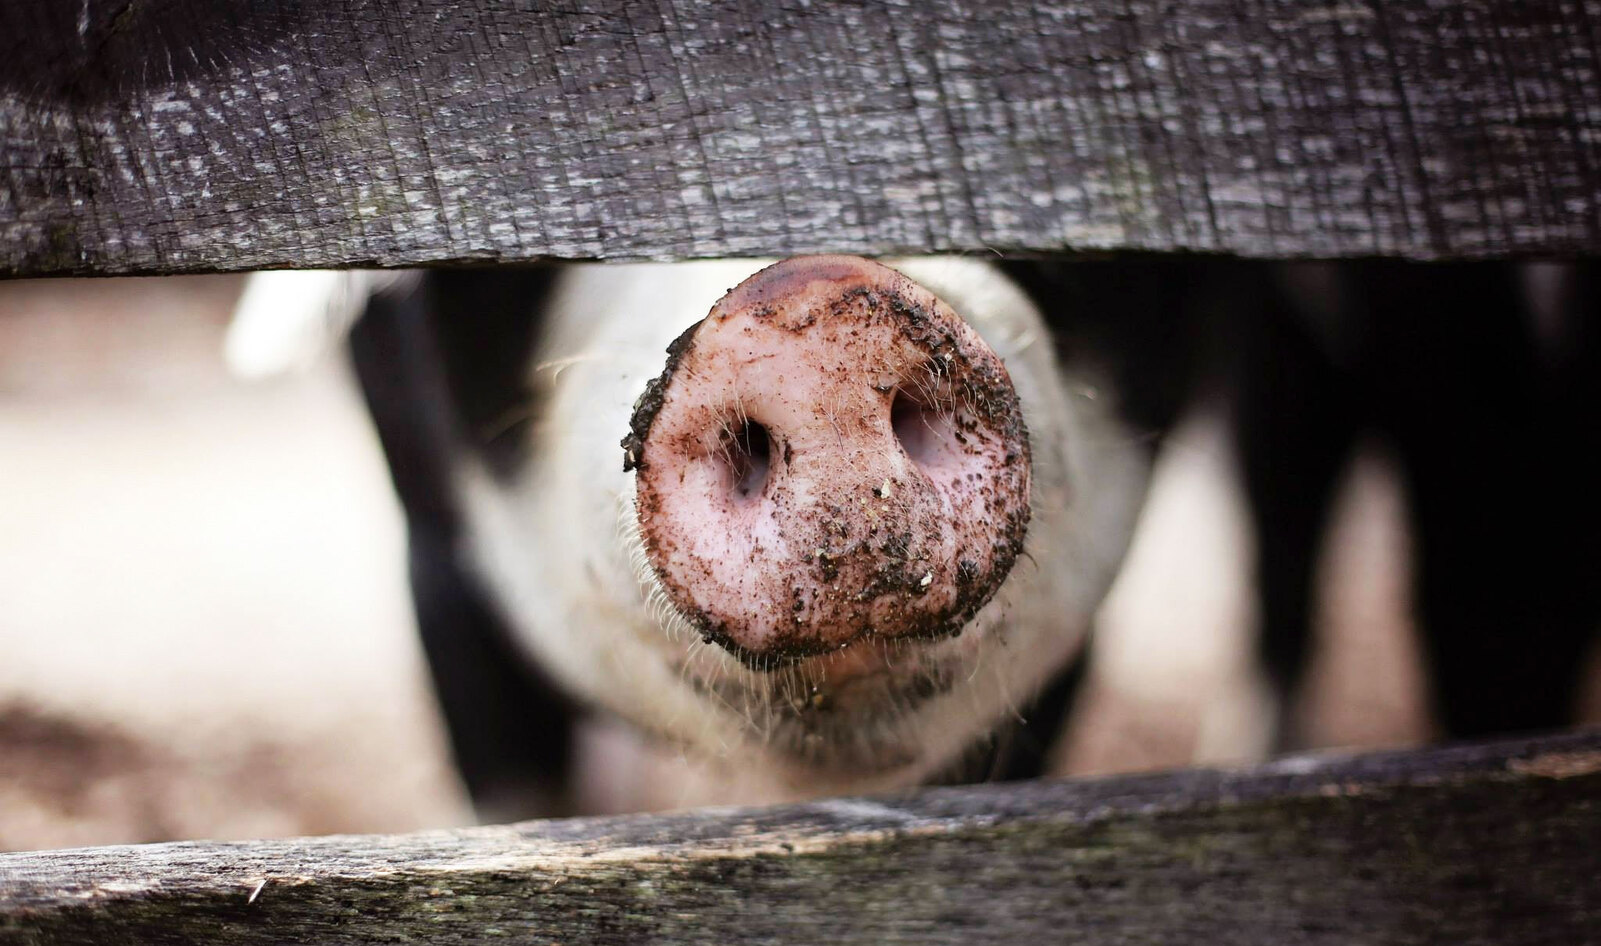 Antibiotic Resistance in Farmed Animals Nearly Tripled Since 2000